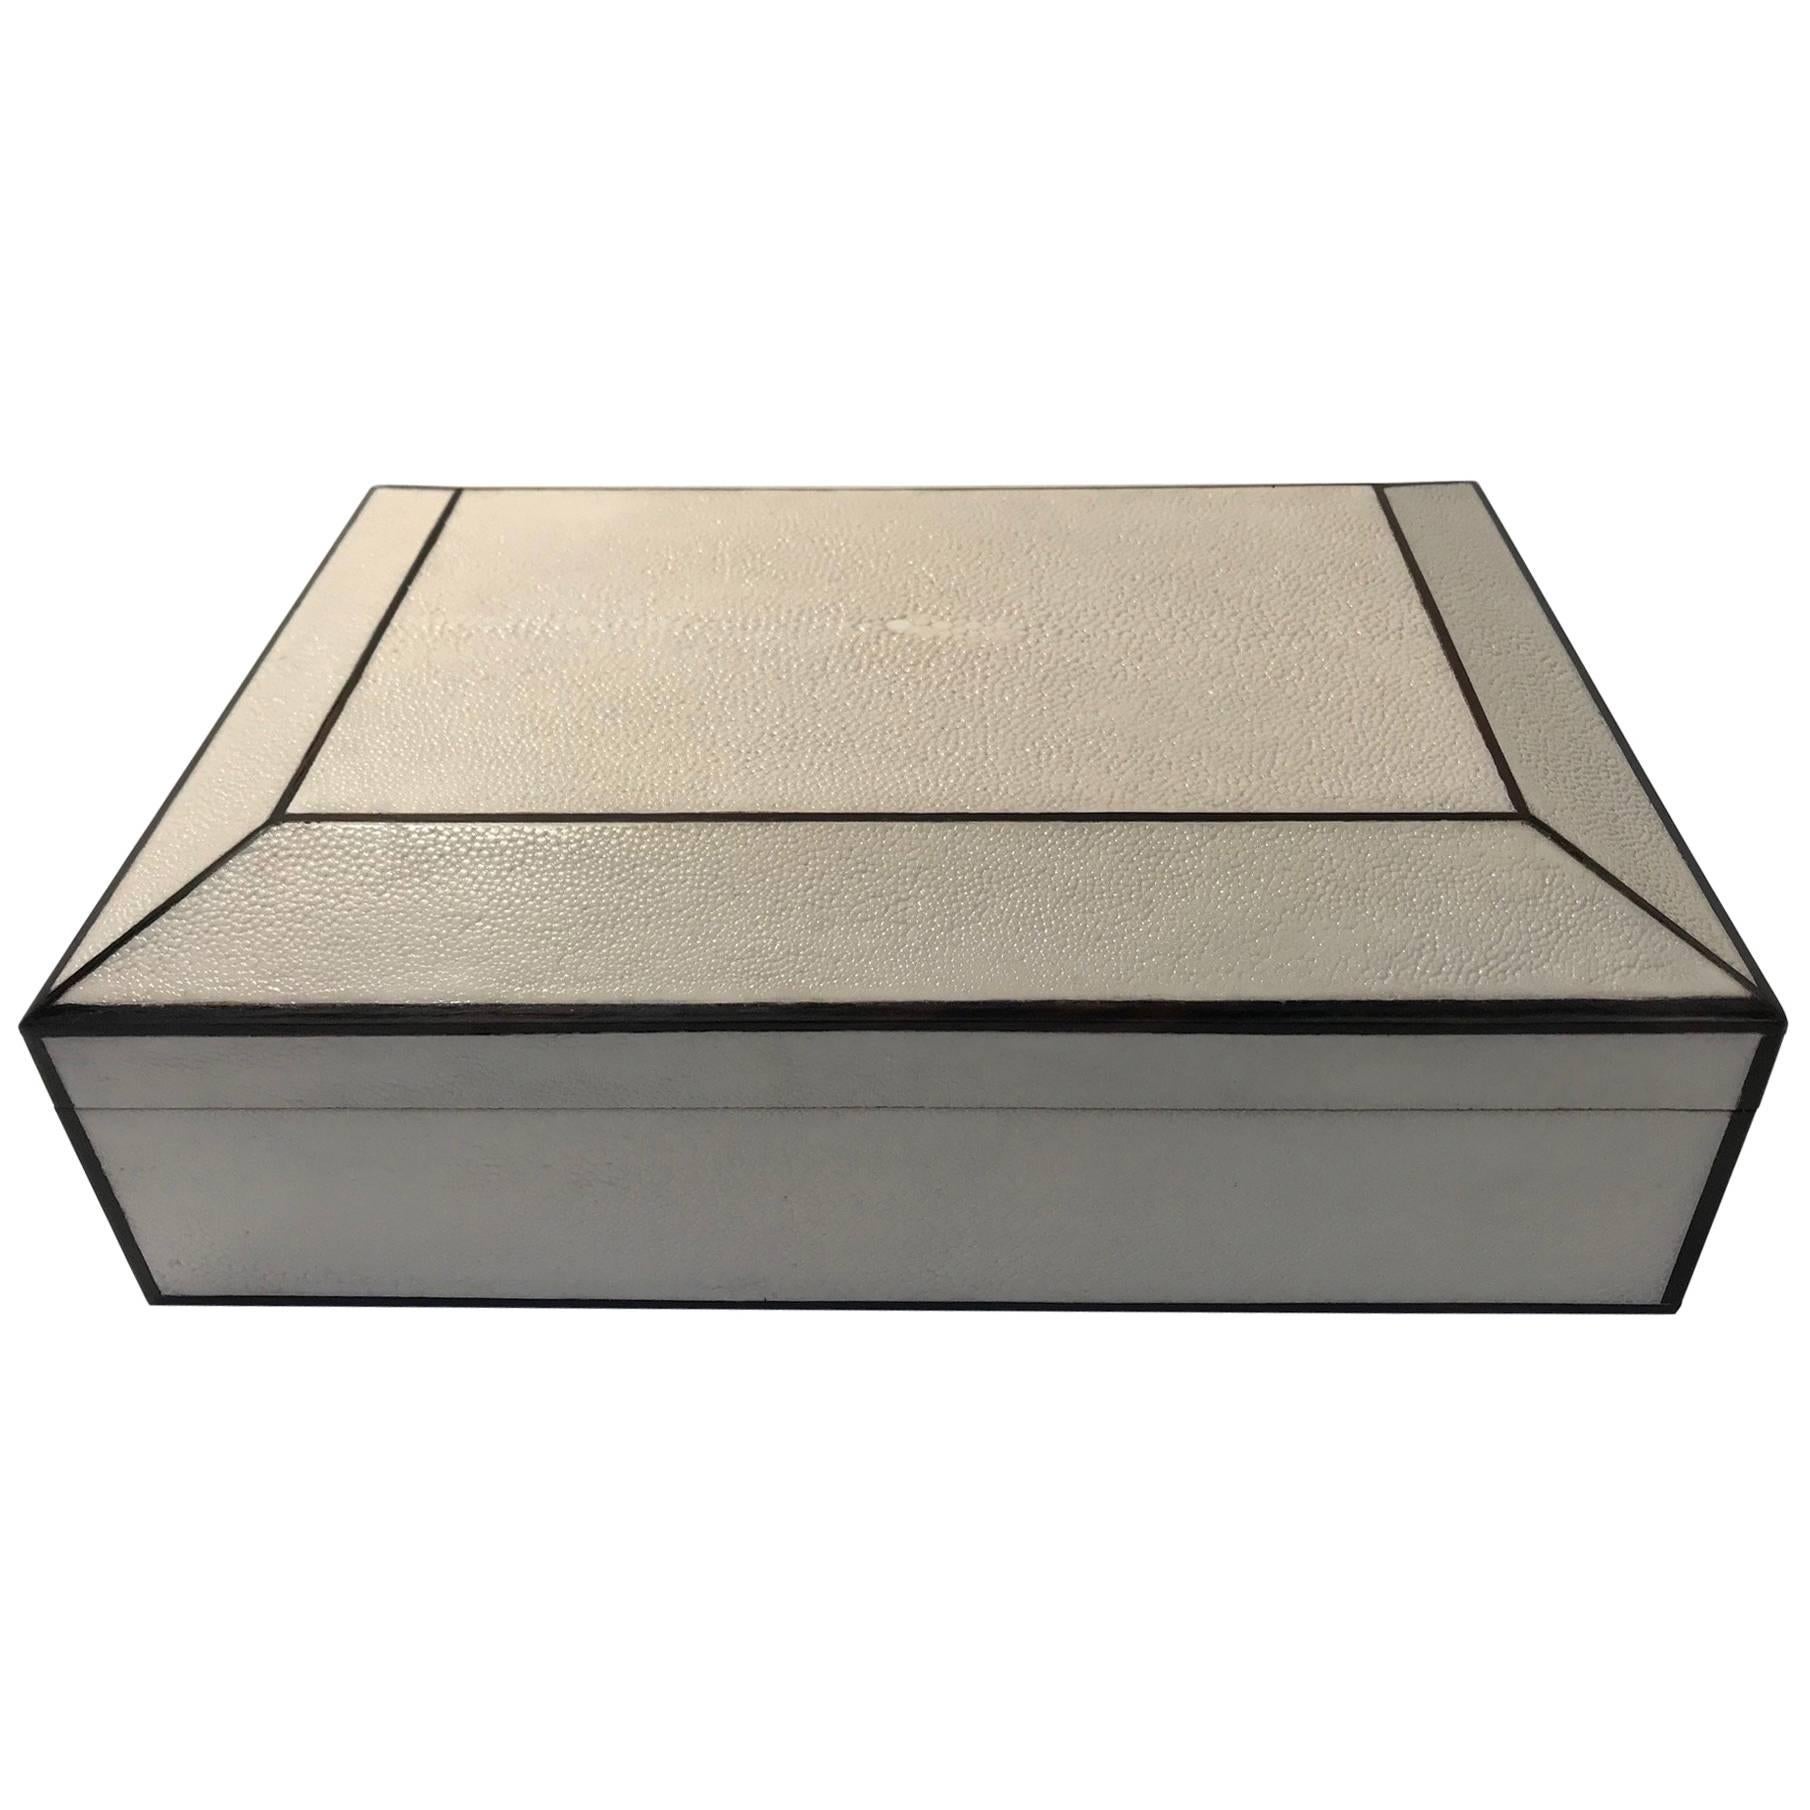  Natural Shagreen Box with Ebony Inlay For Sale